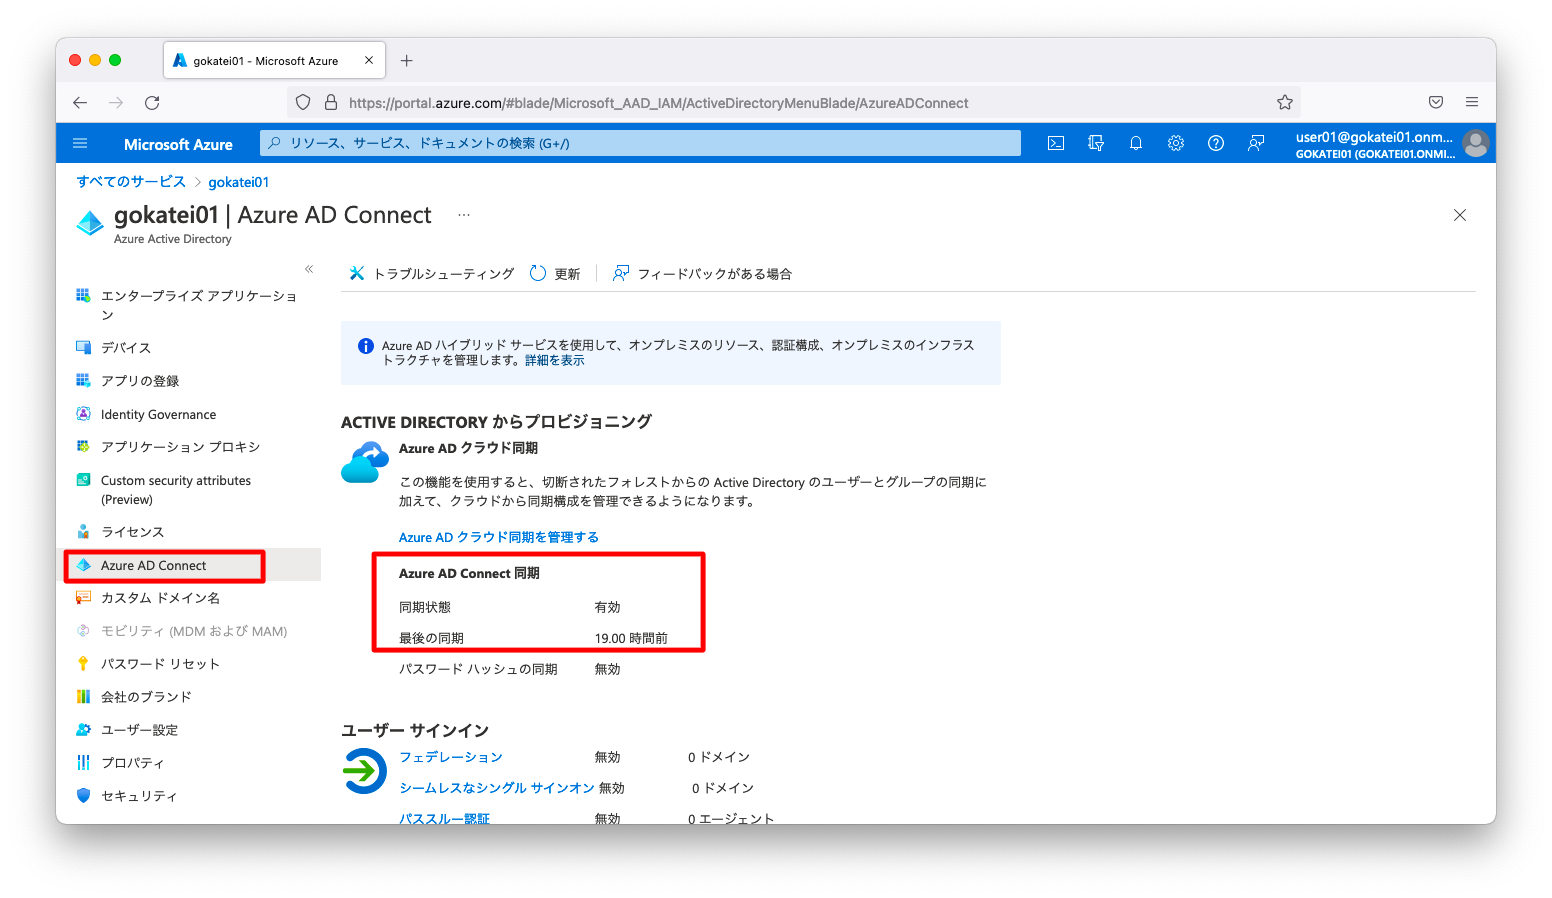 Azure AD Connect 削除前の状態 02